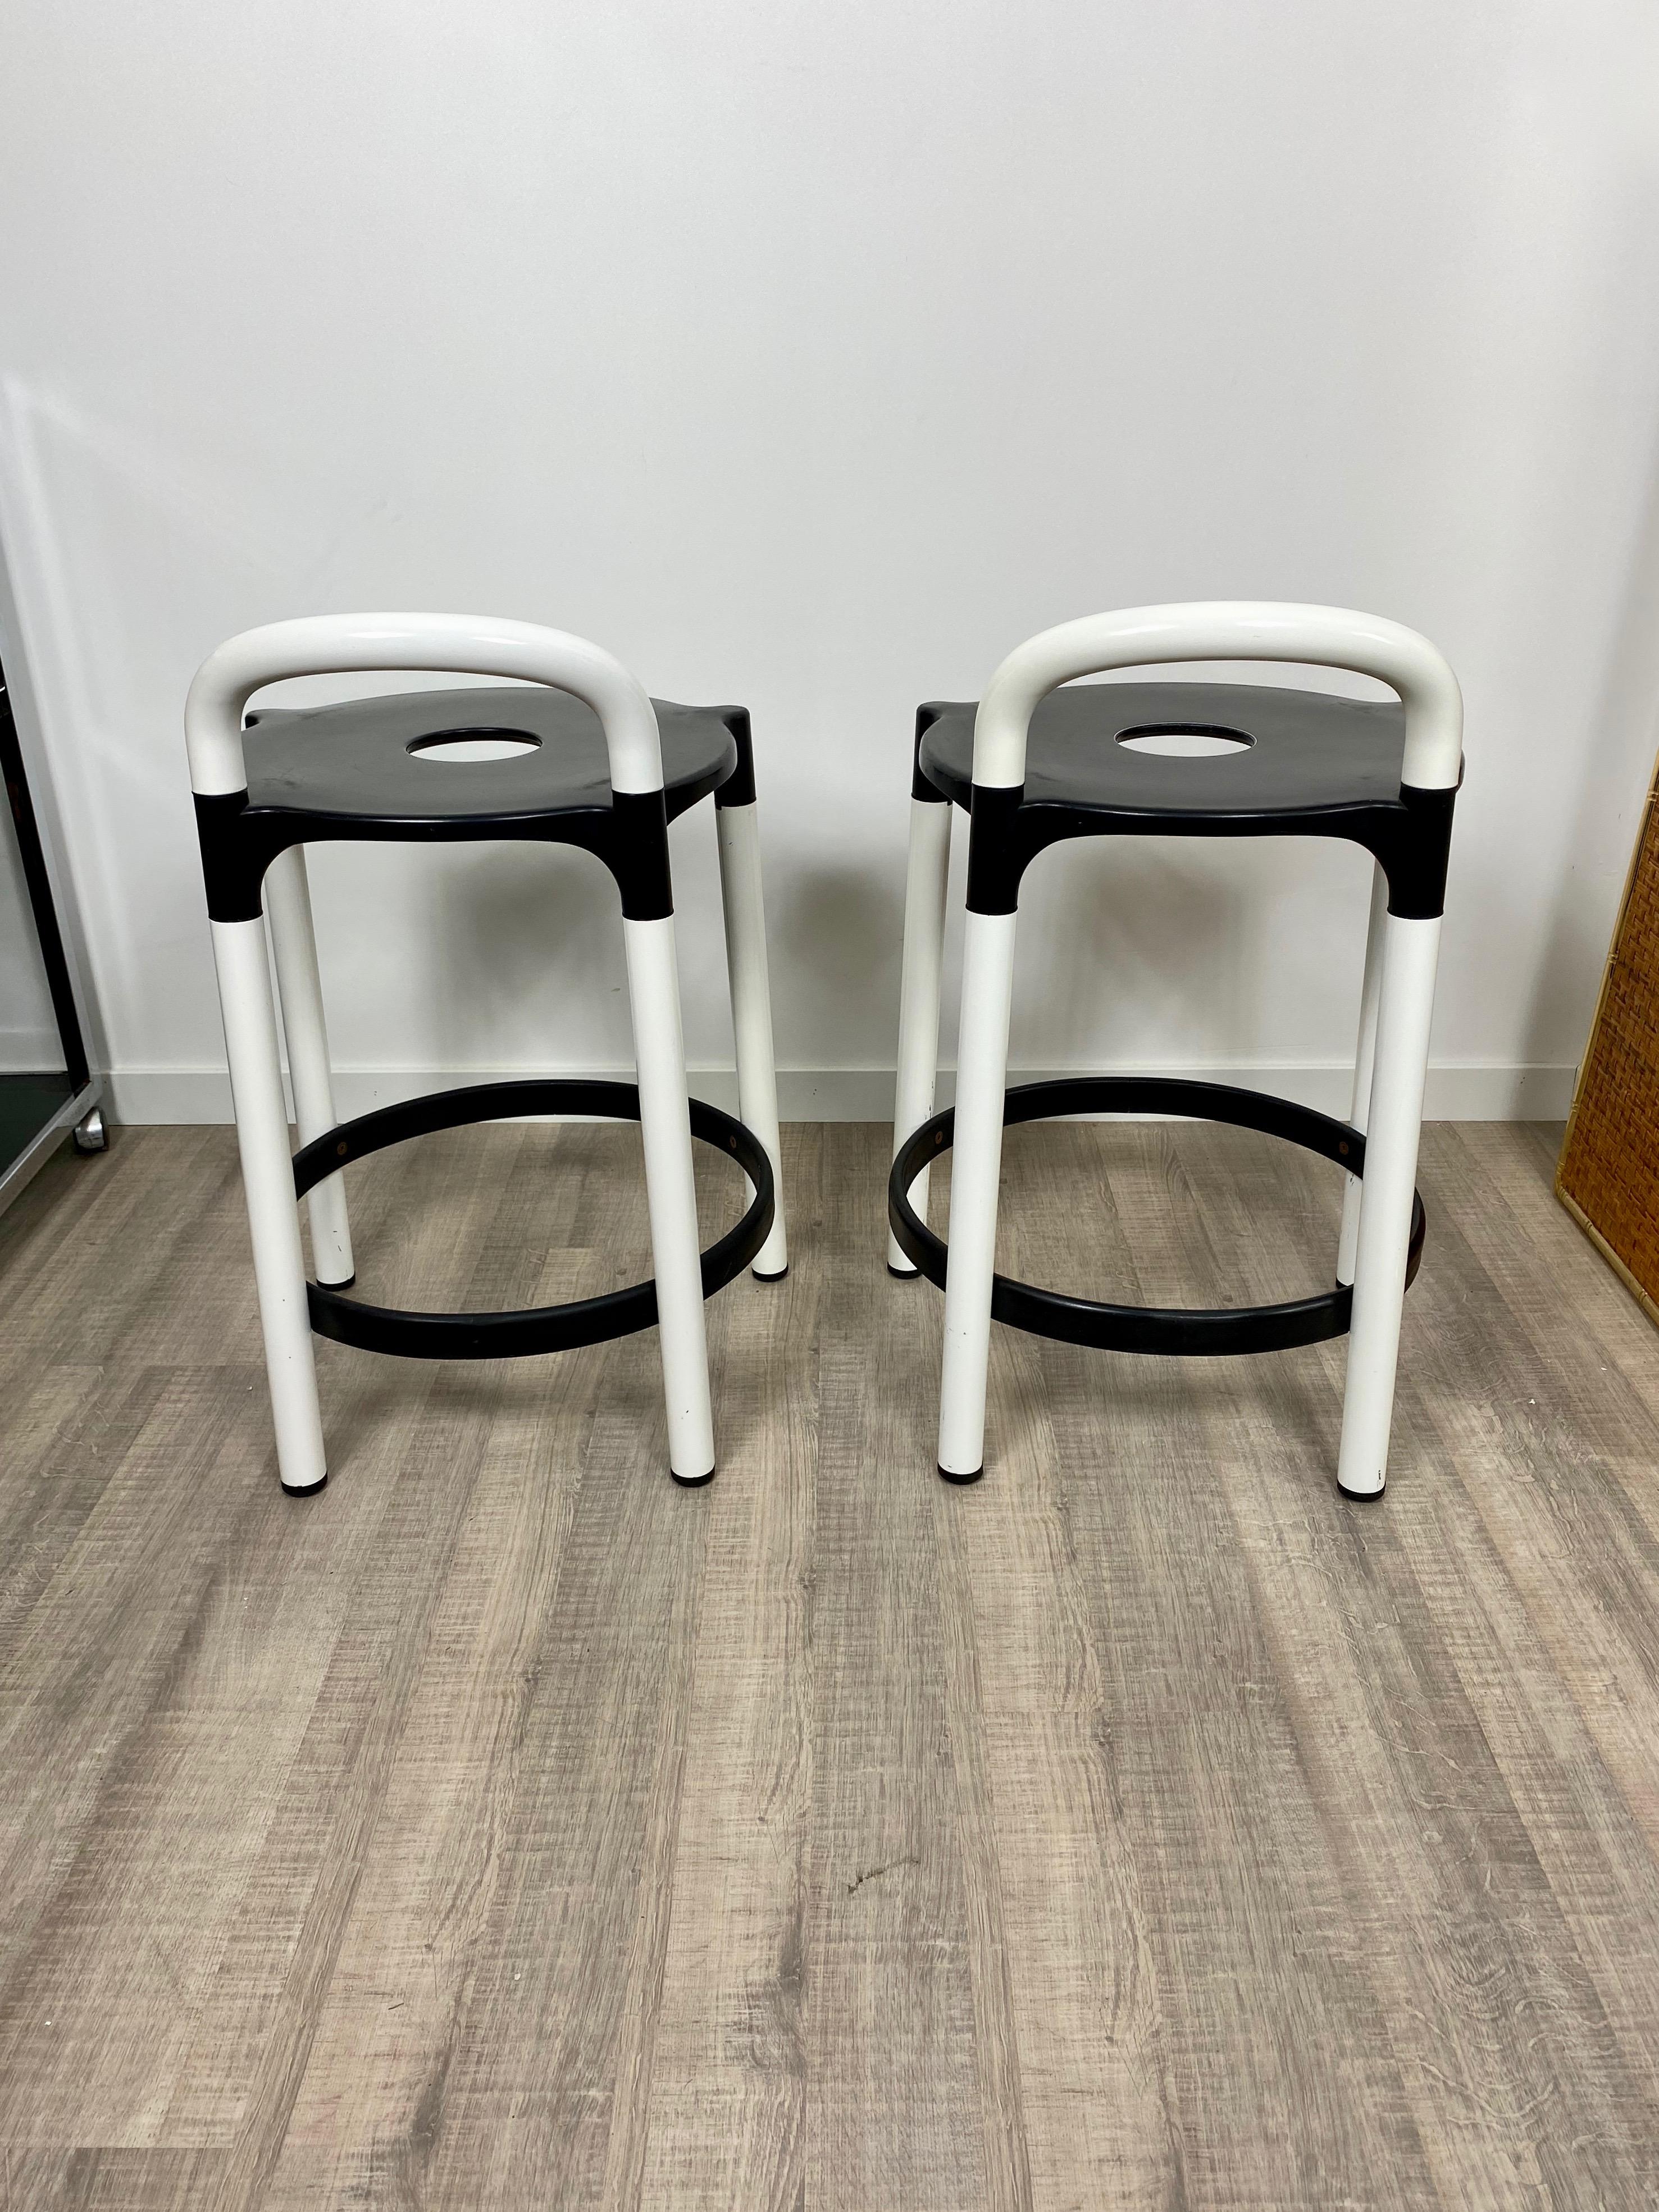 Pair of Postmodern Stools by Anna Casatelli Ferrieri for Kartell, Italy, 1980s For Sale 2